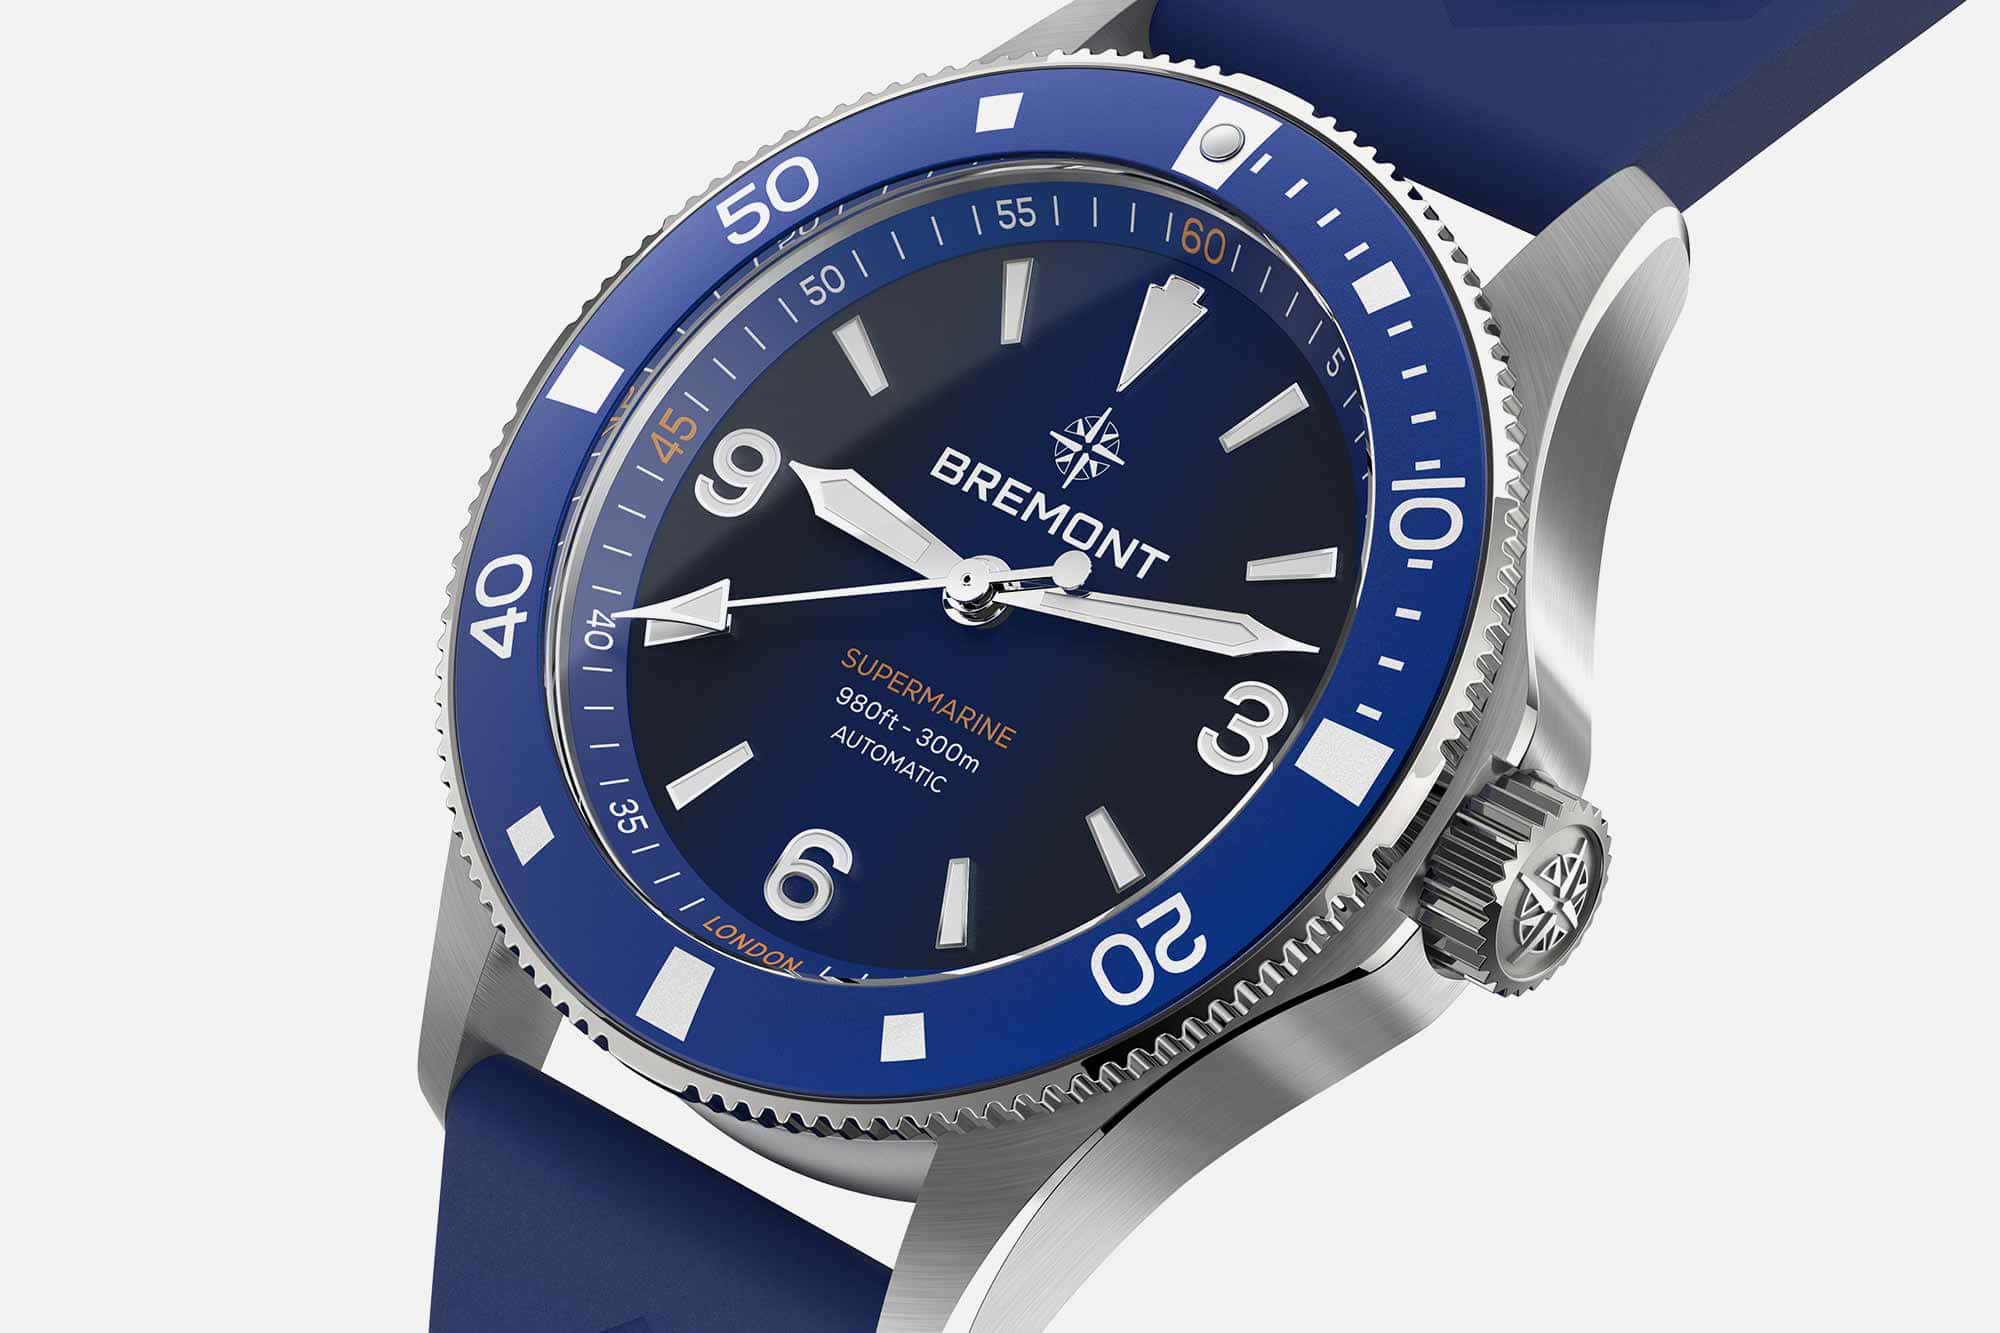 Editorial: Our Reactions to the Bremont Rebrand